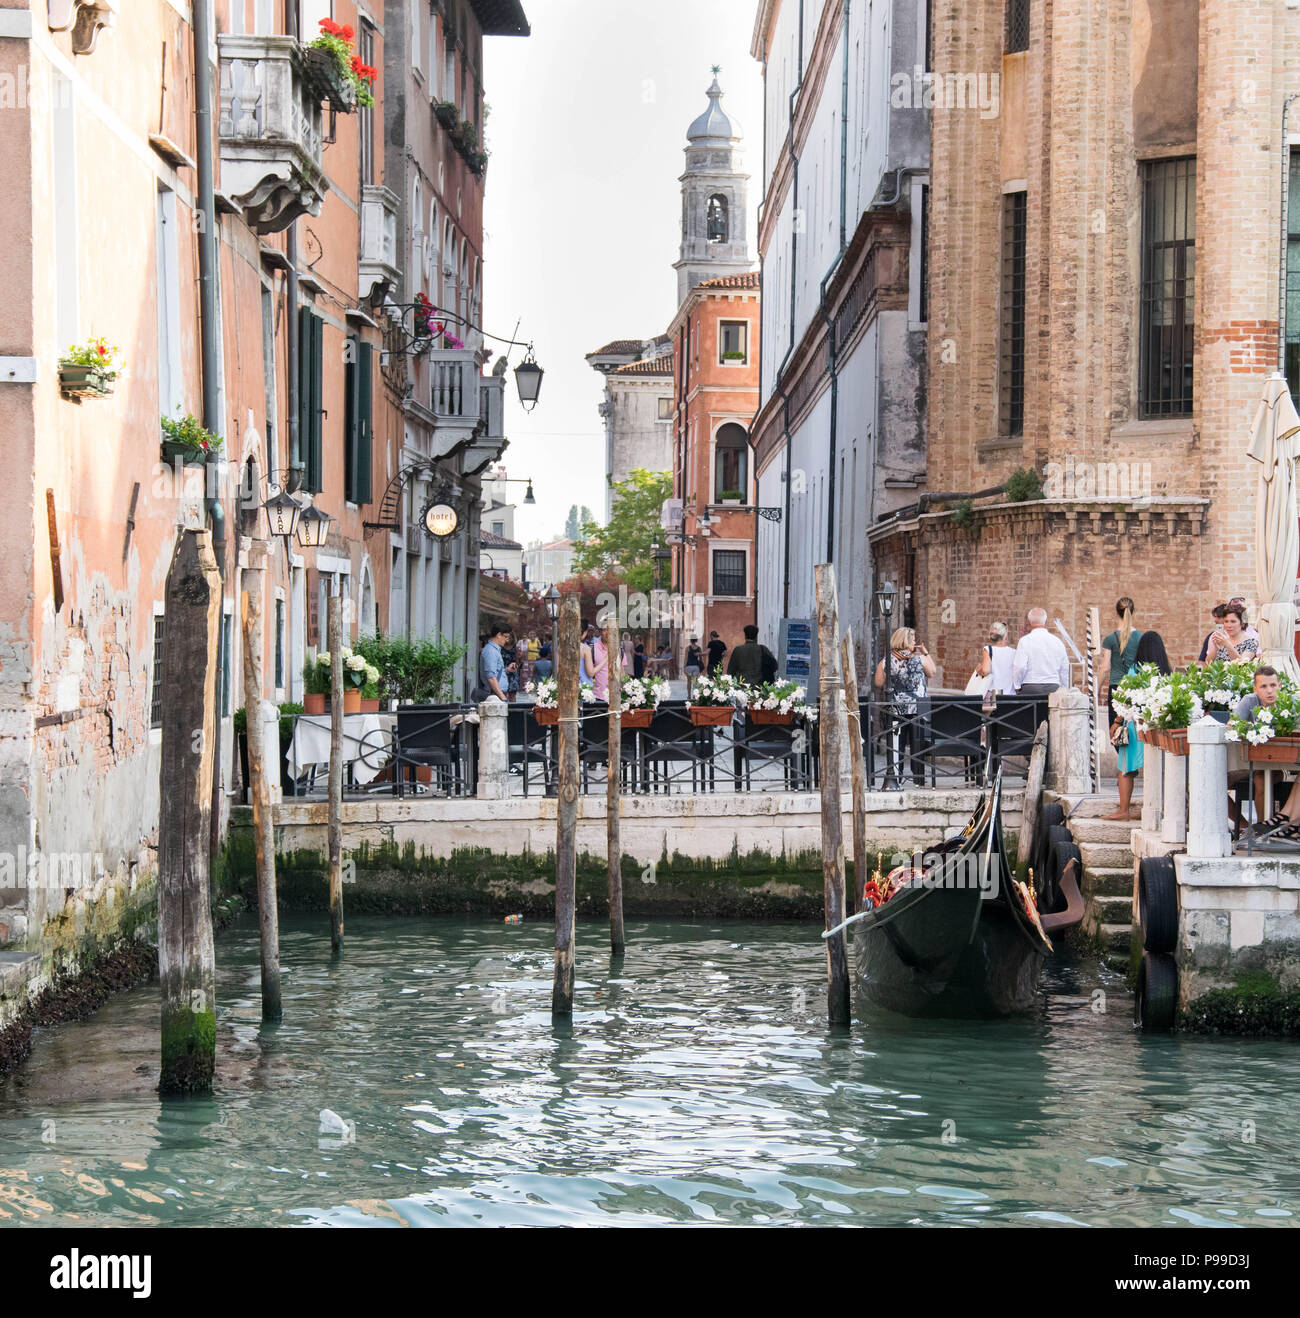 Europe, Italy, Veneto, Venice. People sitting at the restaurant near Ponte del Accademia, Gallerie dell Accademia, at the Grand Canal in Venice. Stock Photo